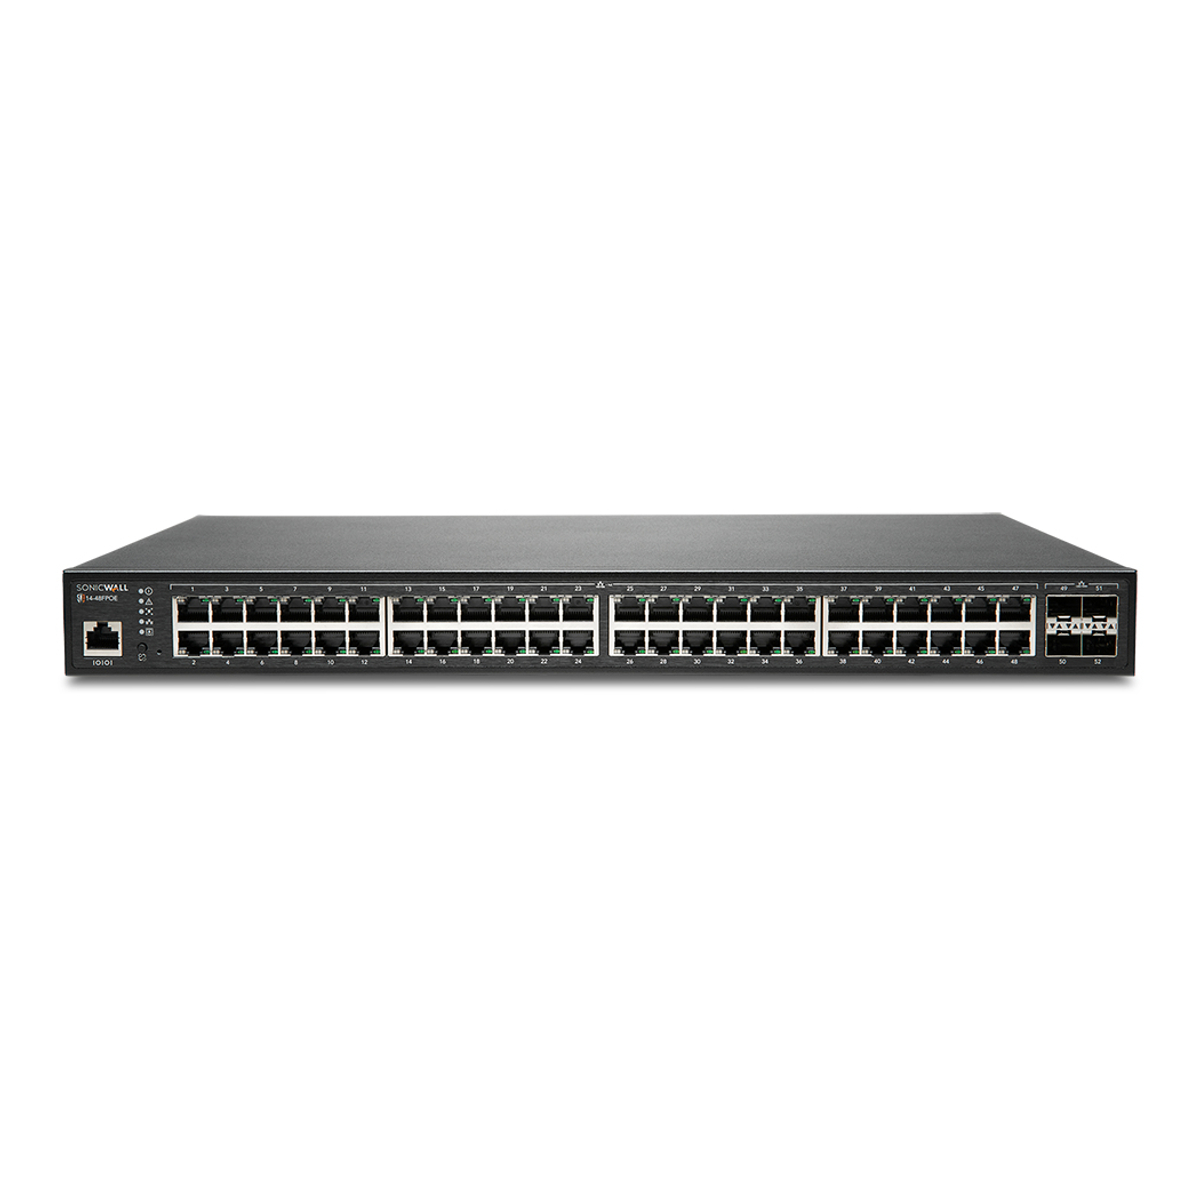 SWITCH SWS14-48FPOE WITH SUPPORT 3YR